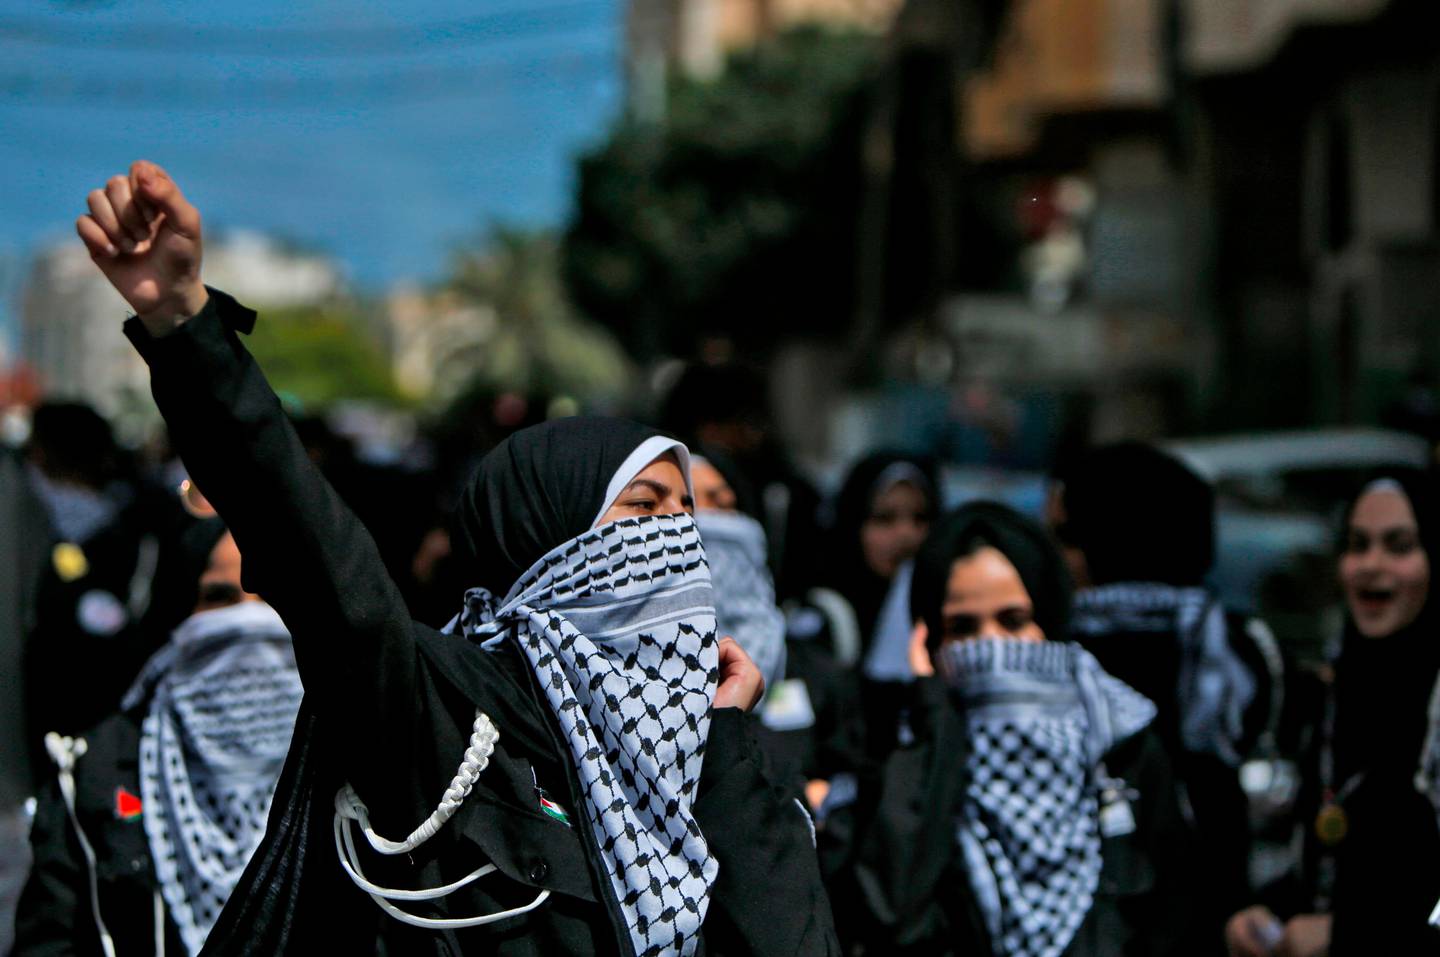 Palestinian youths, using the traditional keffiyeh scarves as masks due to COVID-19, march during a demonstration against Israel's plans to annex parts of the occupied West Bank, in Gaza City on June 22, 2020. - Israel aims to begin a process of annexing West Bank settlements and the Jordan Valley from July 1, as part of a US peace initiative. (Photo by MOHAMMED ABED / AFP)